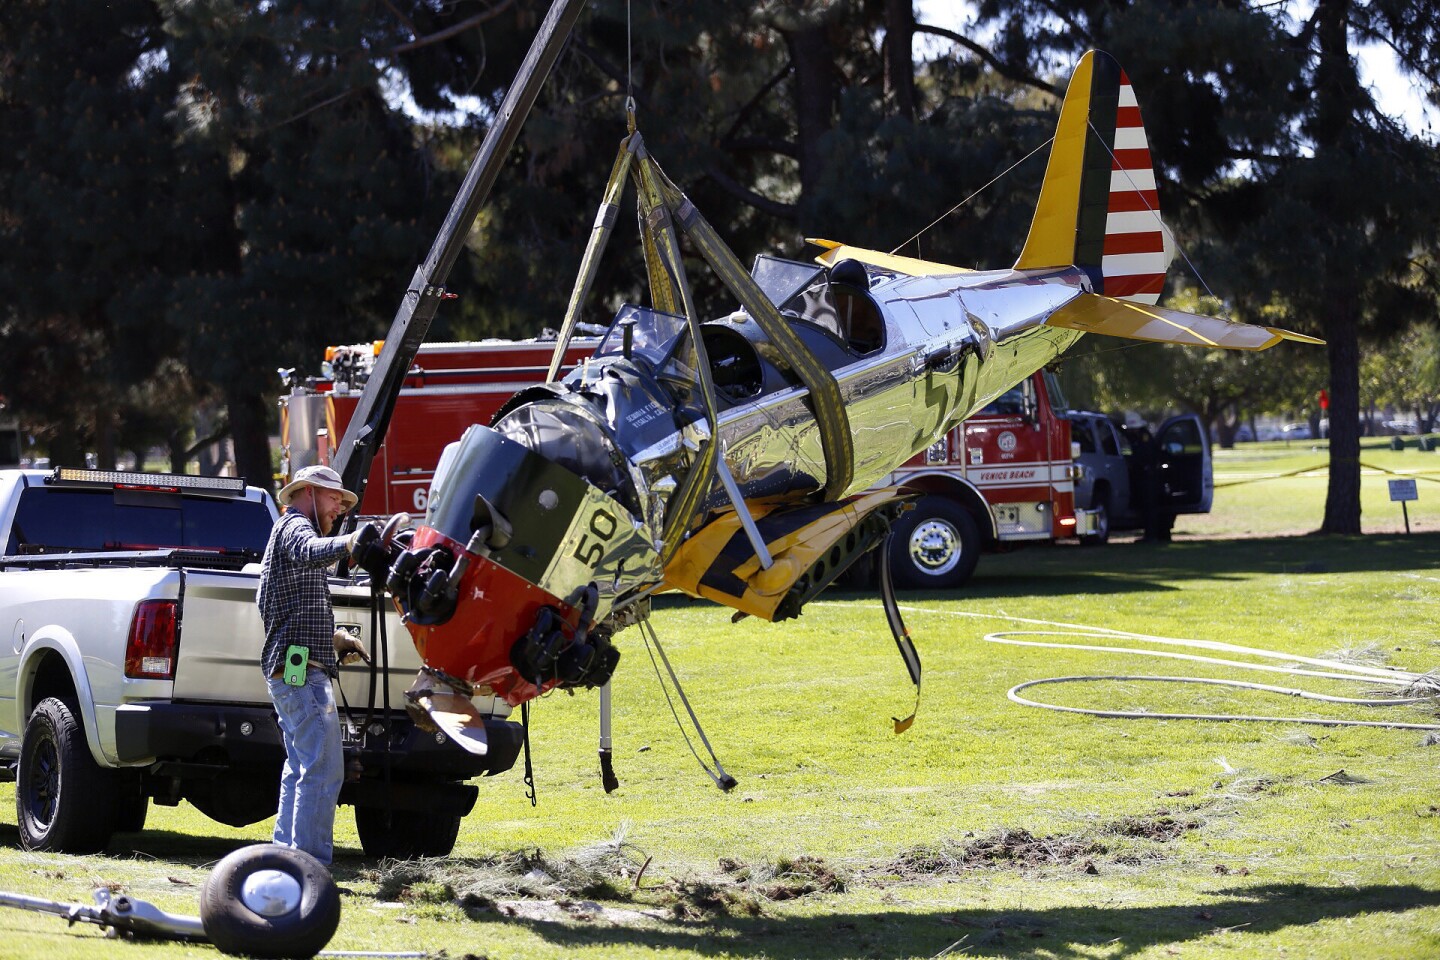 Workers move the vintage plane that crashed on the Penmar golf course not far from Santa Monica Municipal Airport.